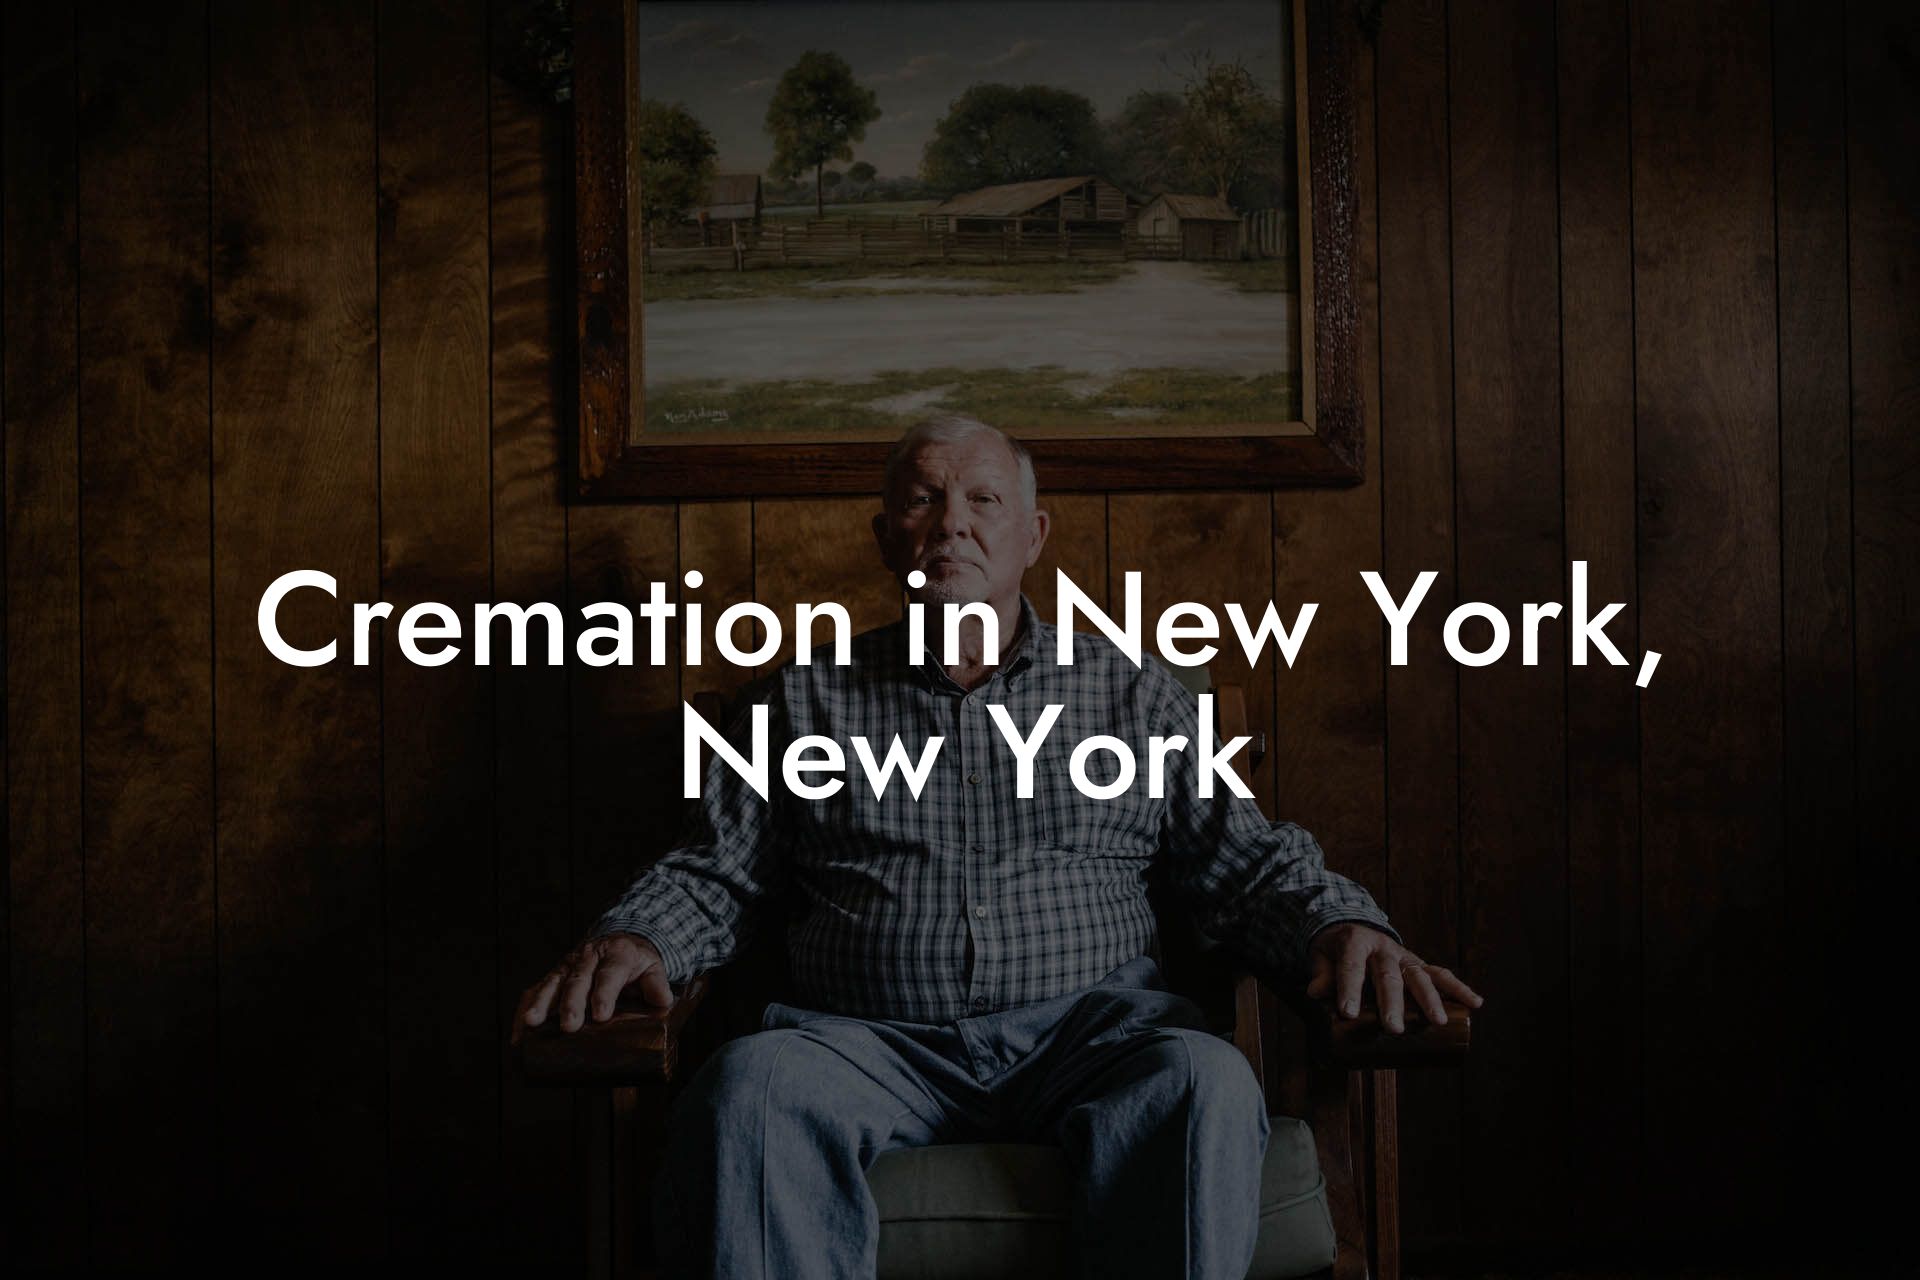 Cremation in New York, New York